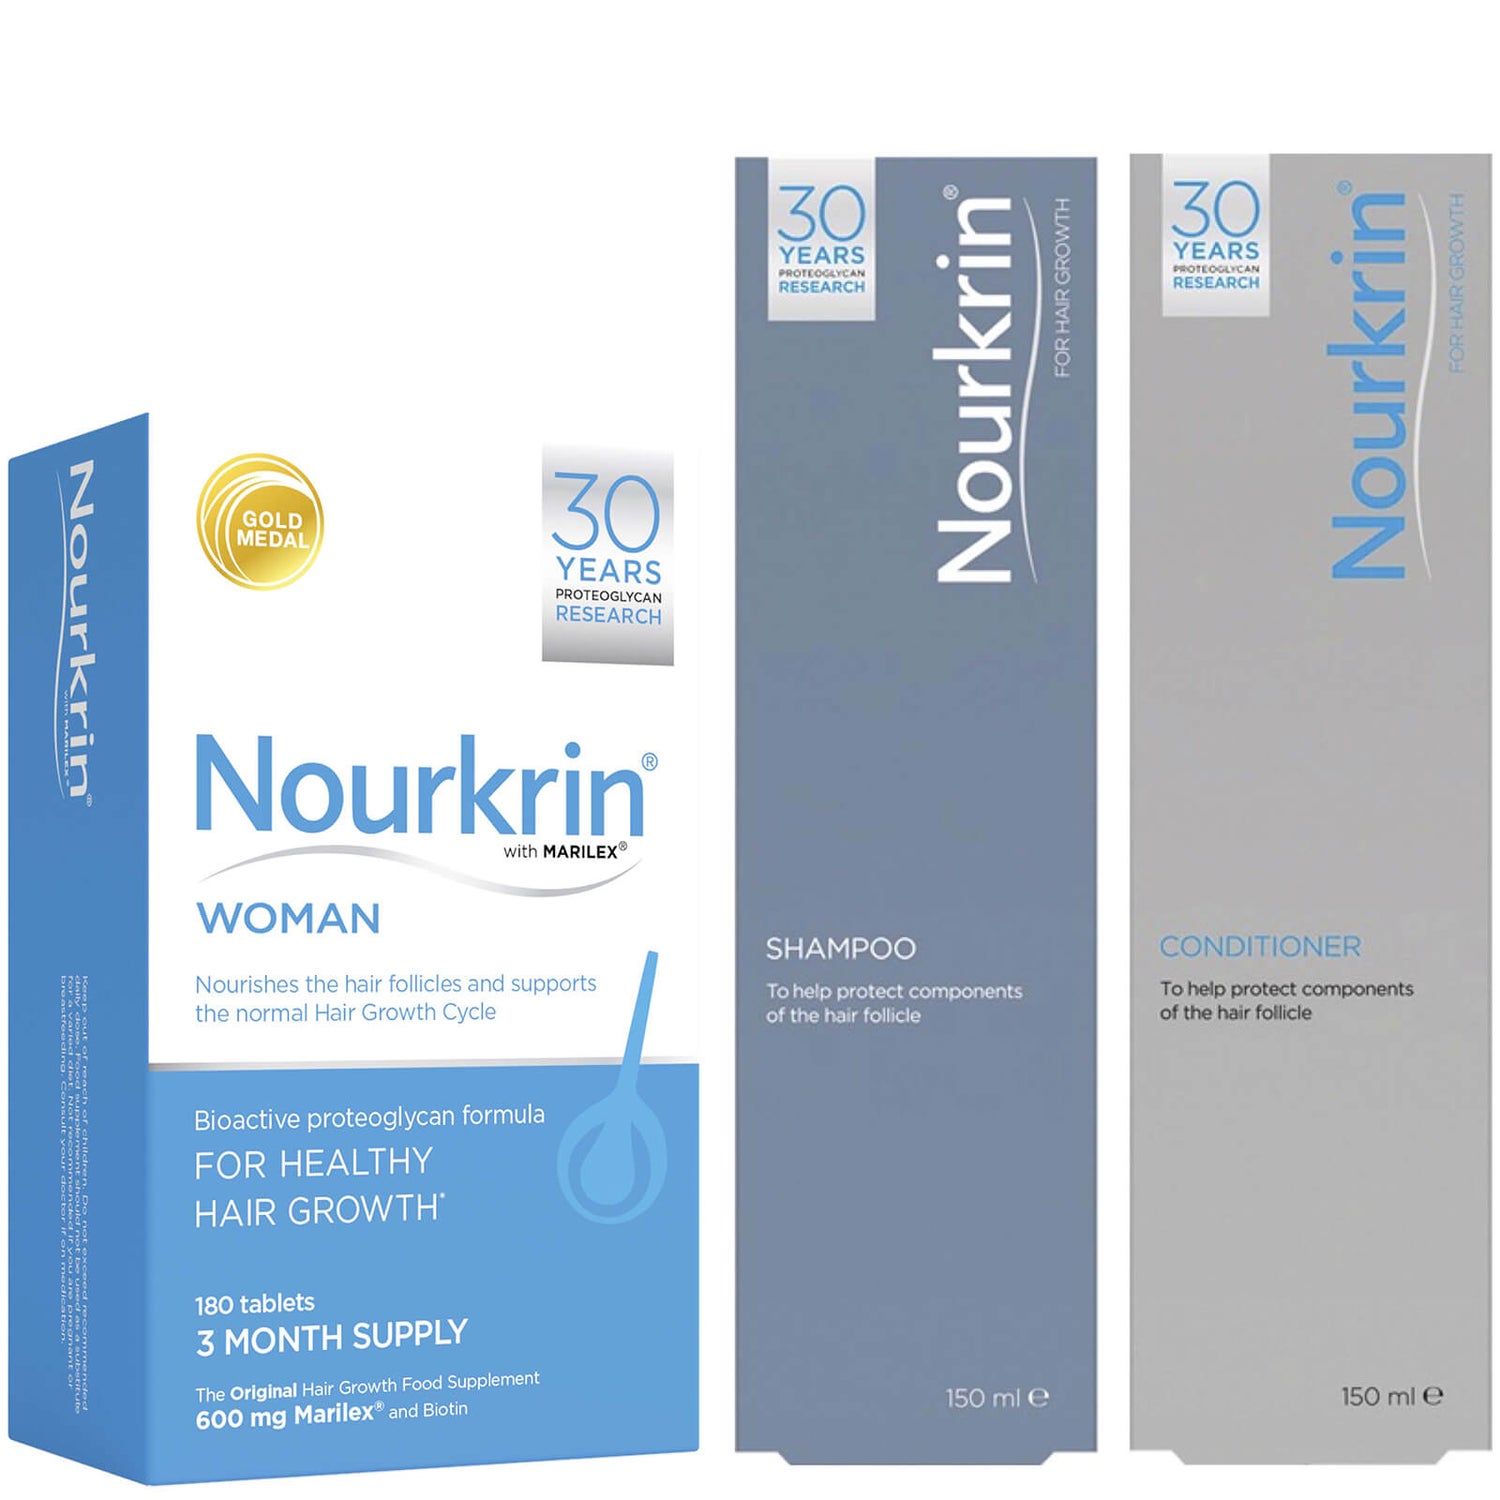 Nourkrin Woman Value Pack – 180 Tablets + Shampoo & Conditioner (2 x 150 ml)